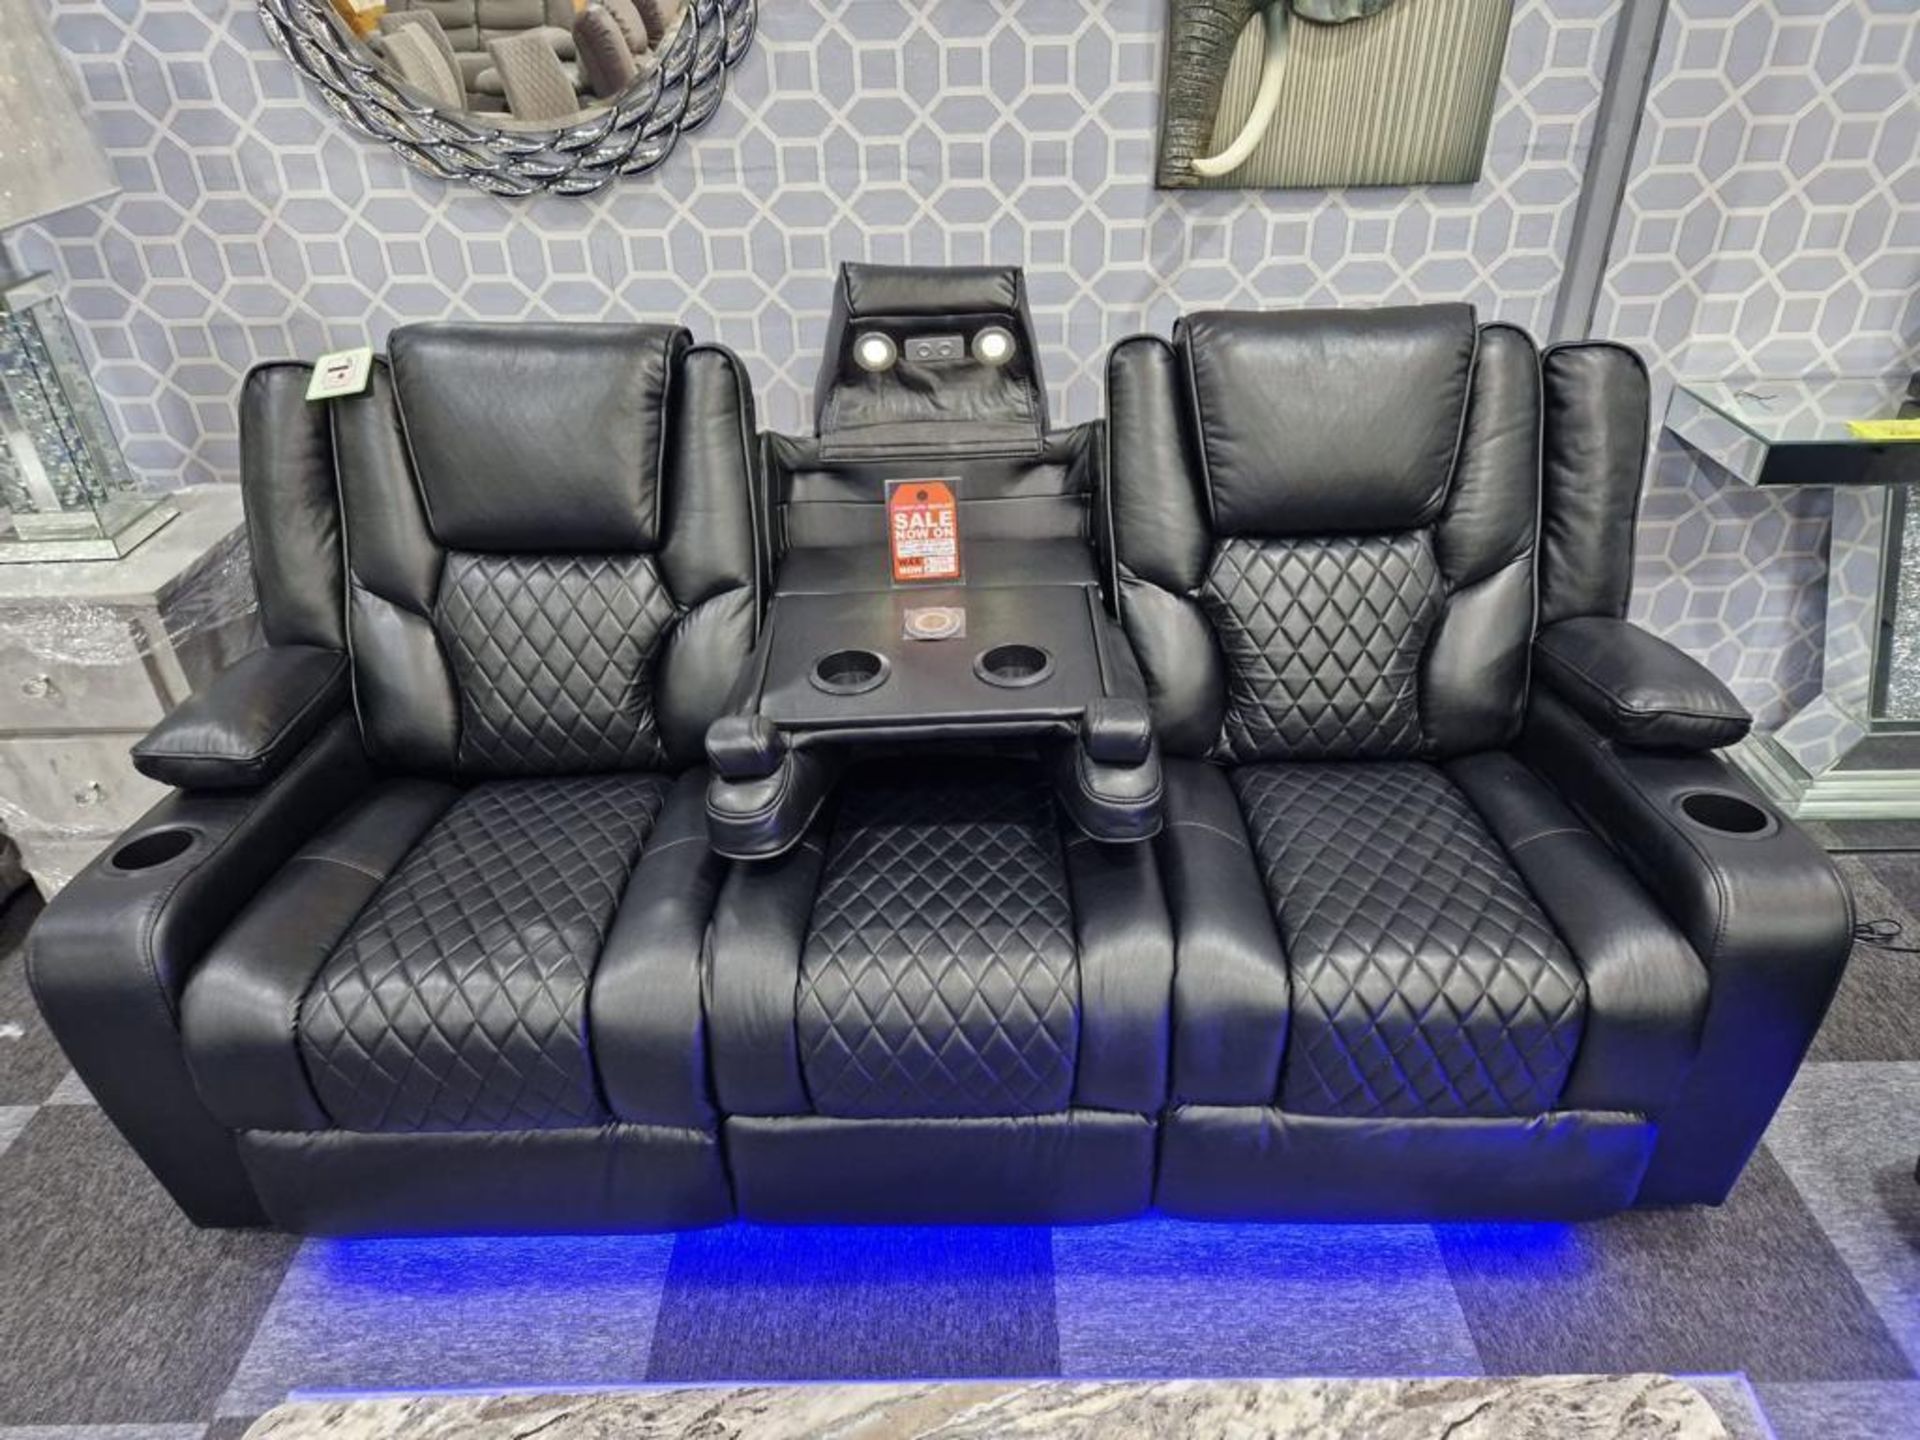 BRAND NEW Bentley Black Leather 3 Seater Electric Recliner With Wireless Charging and Floor lights! - Image 4 of 6